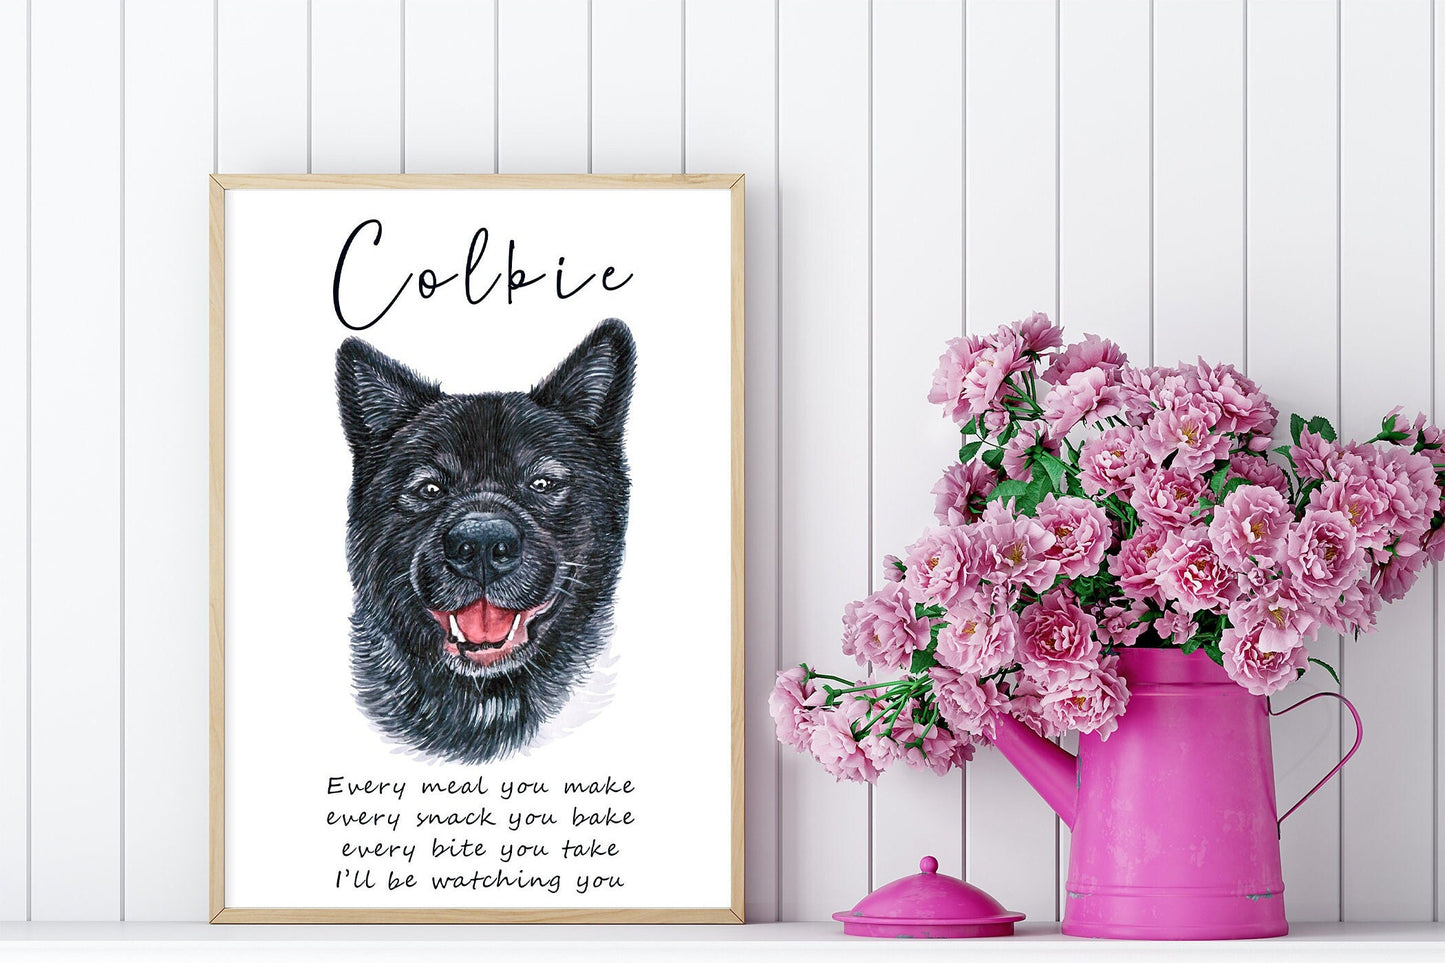 Spitz style dog artwork - portraits of keeshond, Elkhound, Akitas, Samoyed, huskies all with custom funny message | A4 | A5 | Greeting card